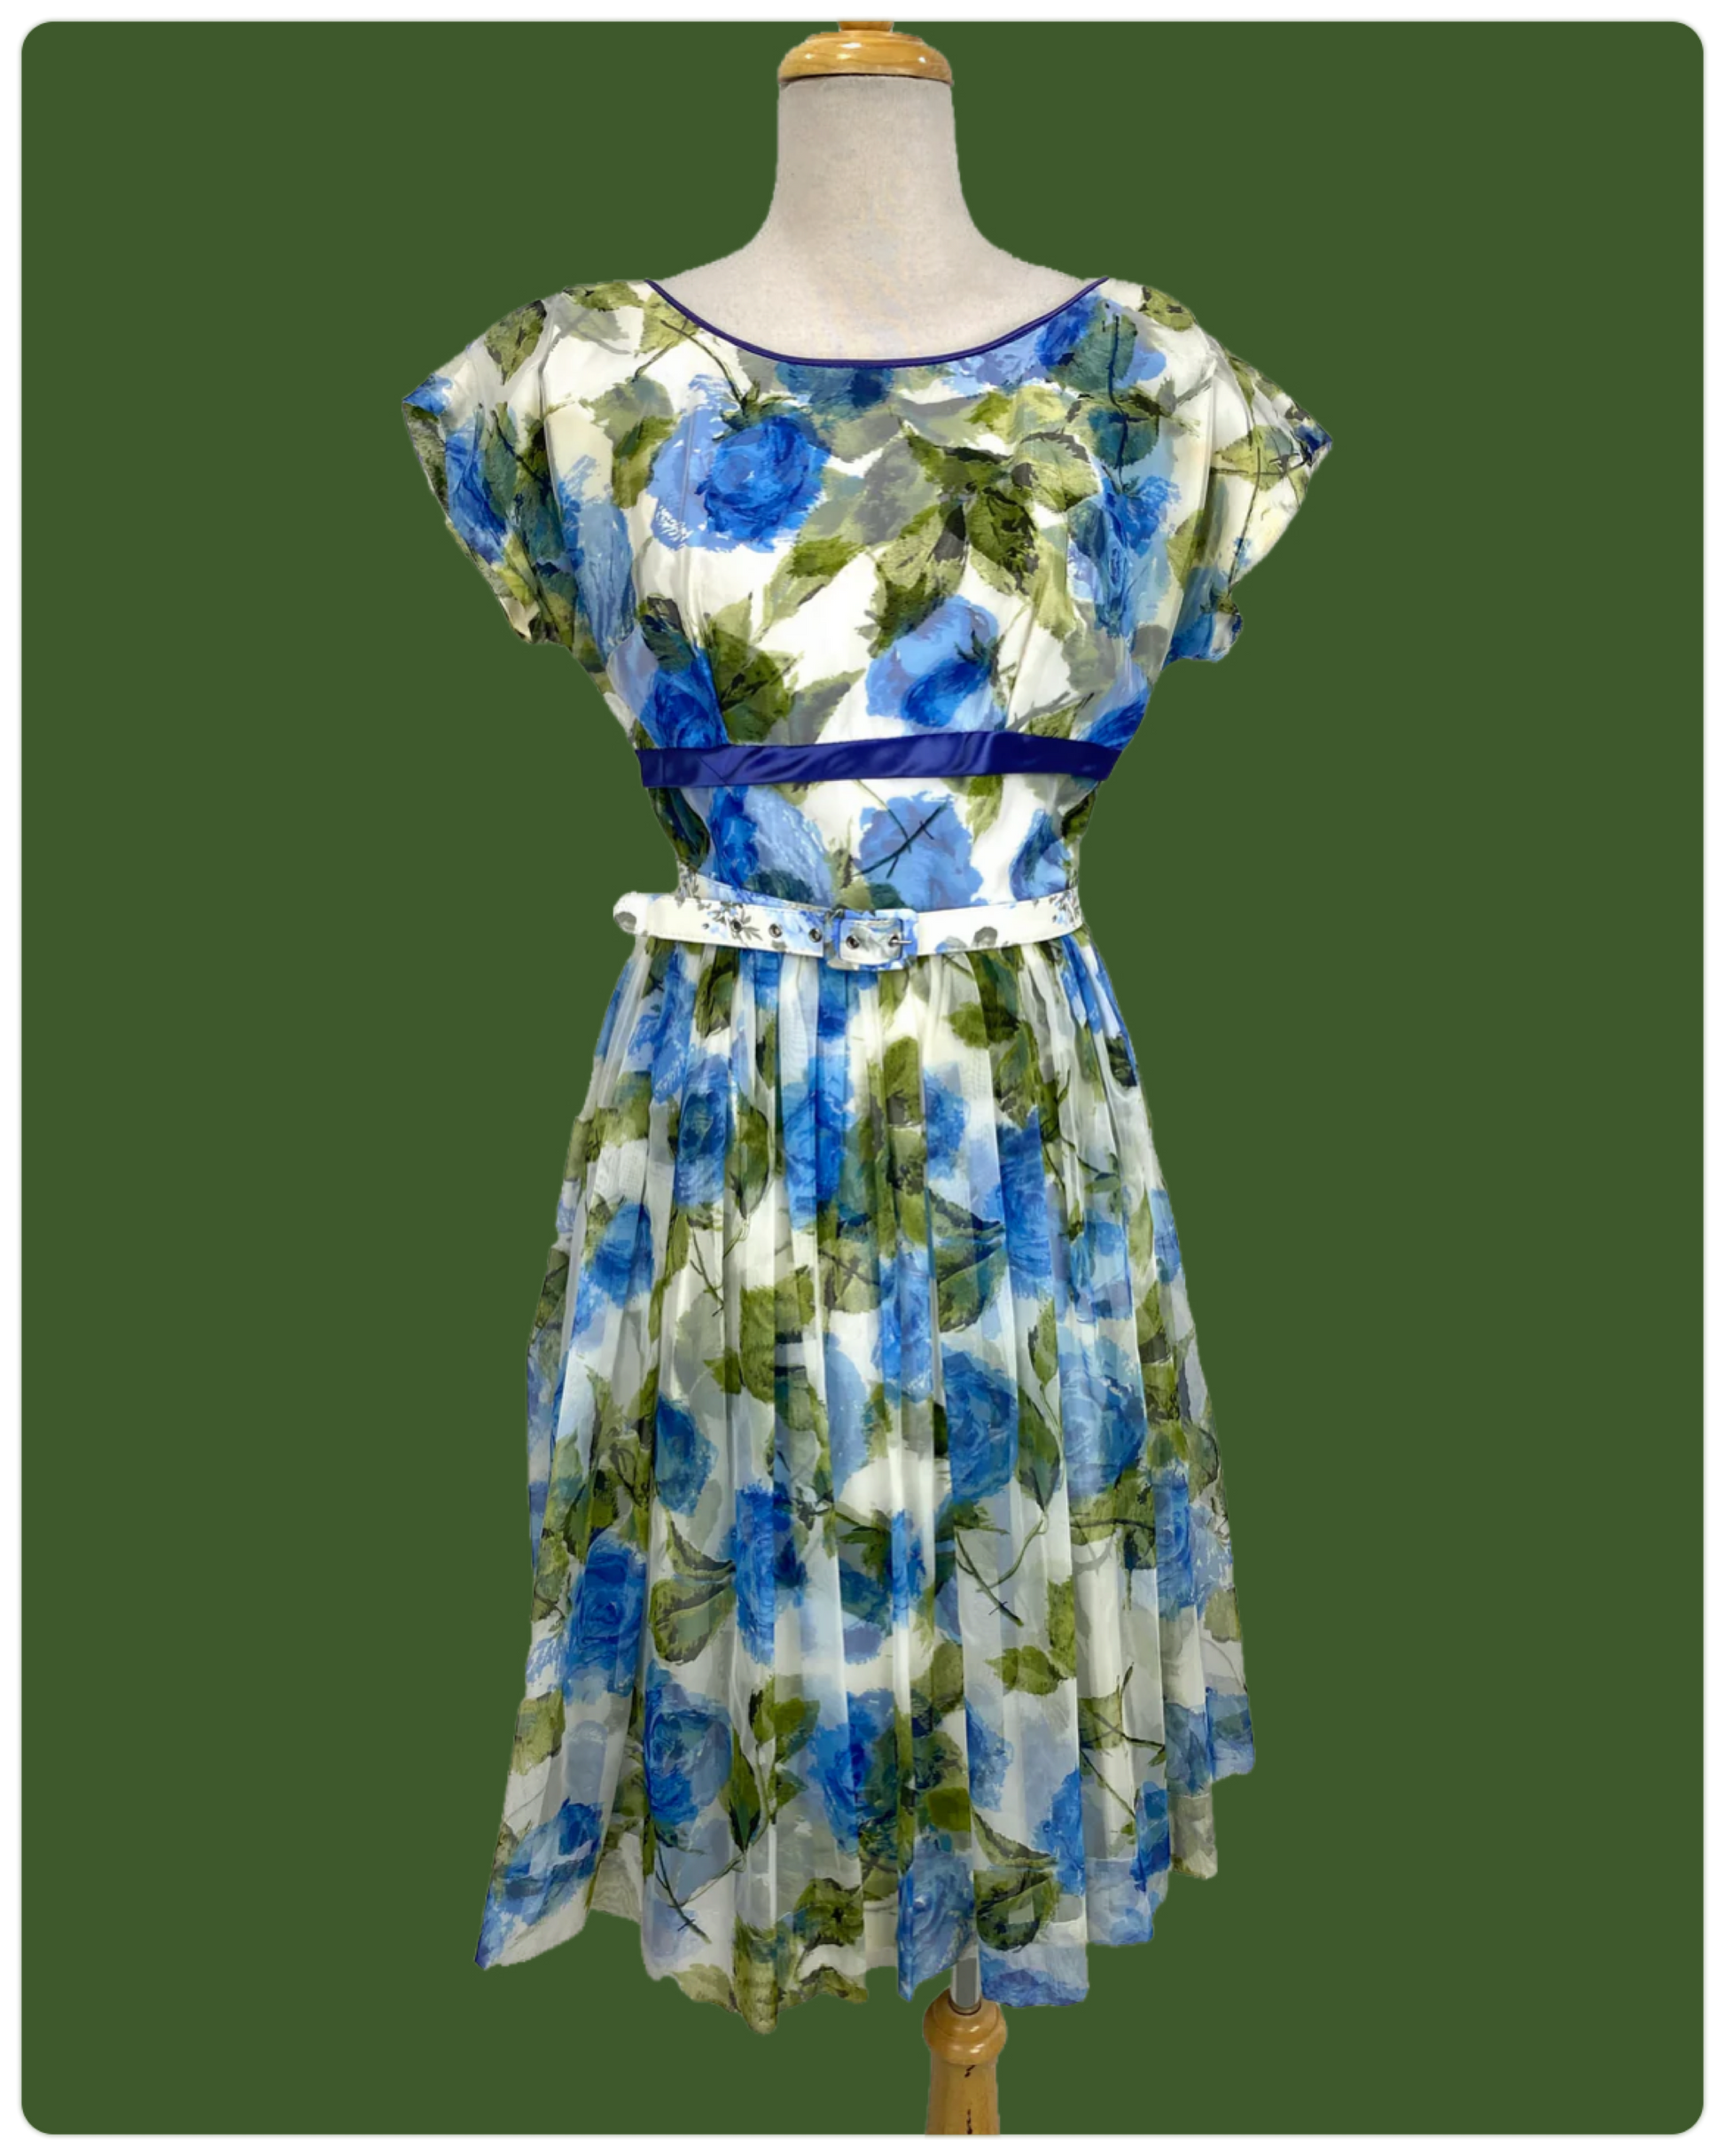 Vintage 1950s Blue/ Green Floral Print Rayon Tea Dress with Belt, Small